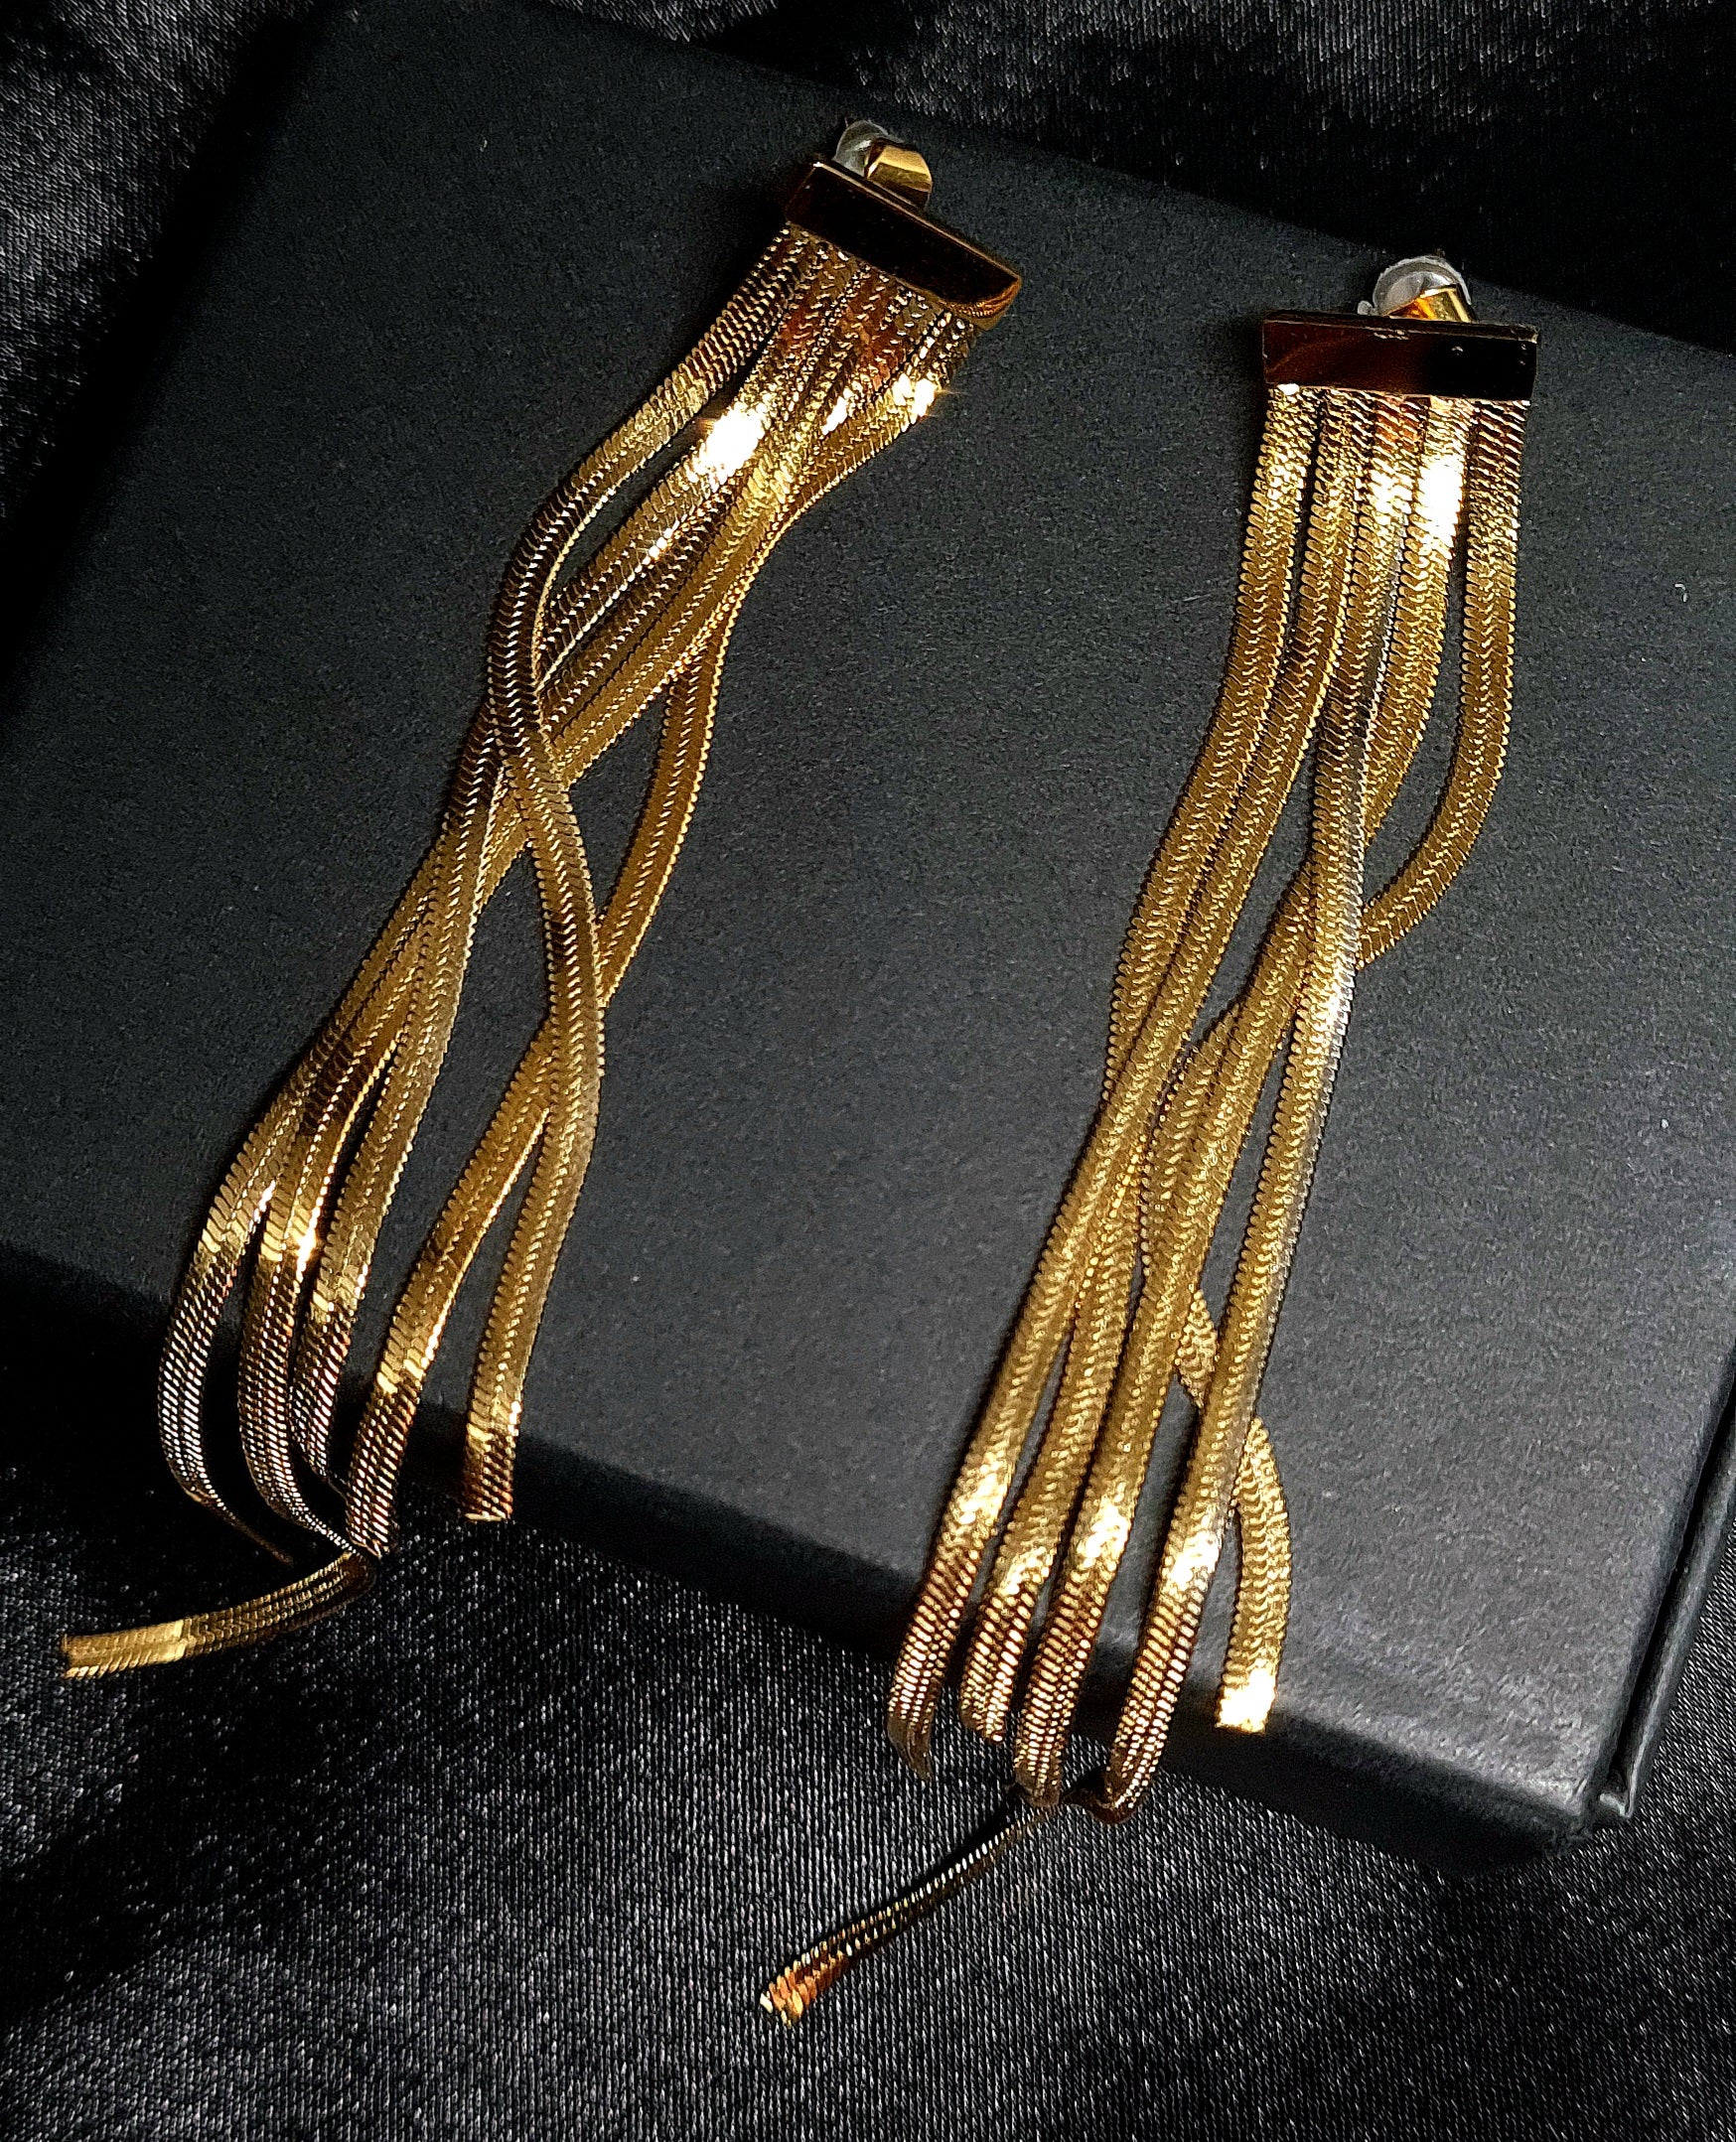 Gold chain earrings sitting on a black box. The earrings are long and have a fringe design. They are made of gold and have a shiny finish. The earrings are sitting on top of a black box.